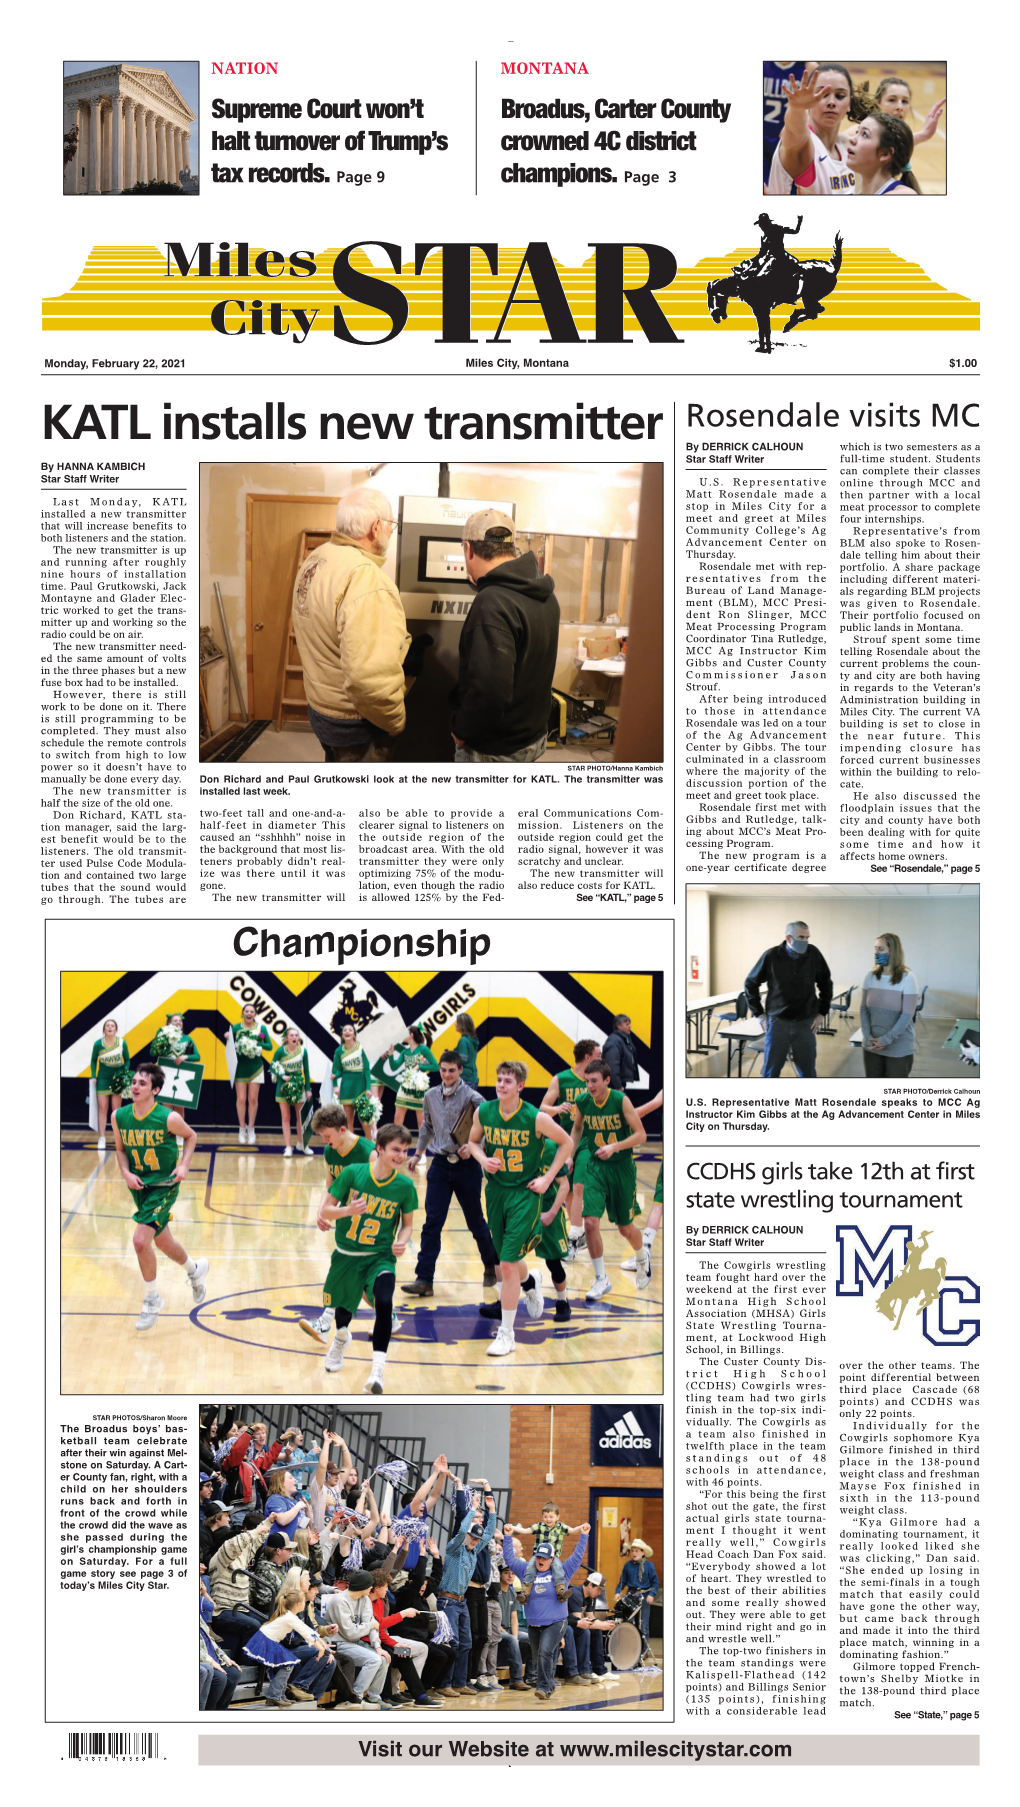 KATL Installs New Transmitter Rosendale Visits MC by DERRICK CALHOUN Which Is Two Semesters As a Star Staff Writer Full-Time Student